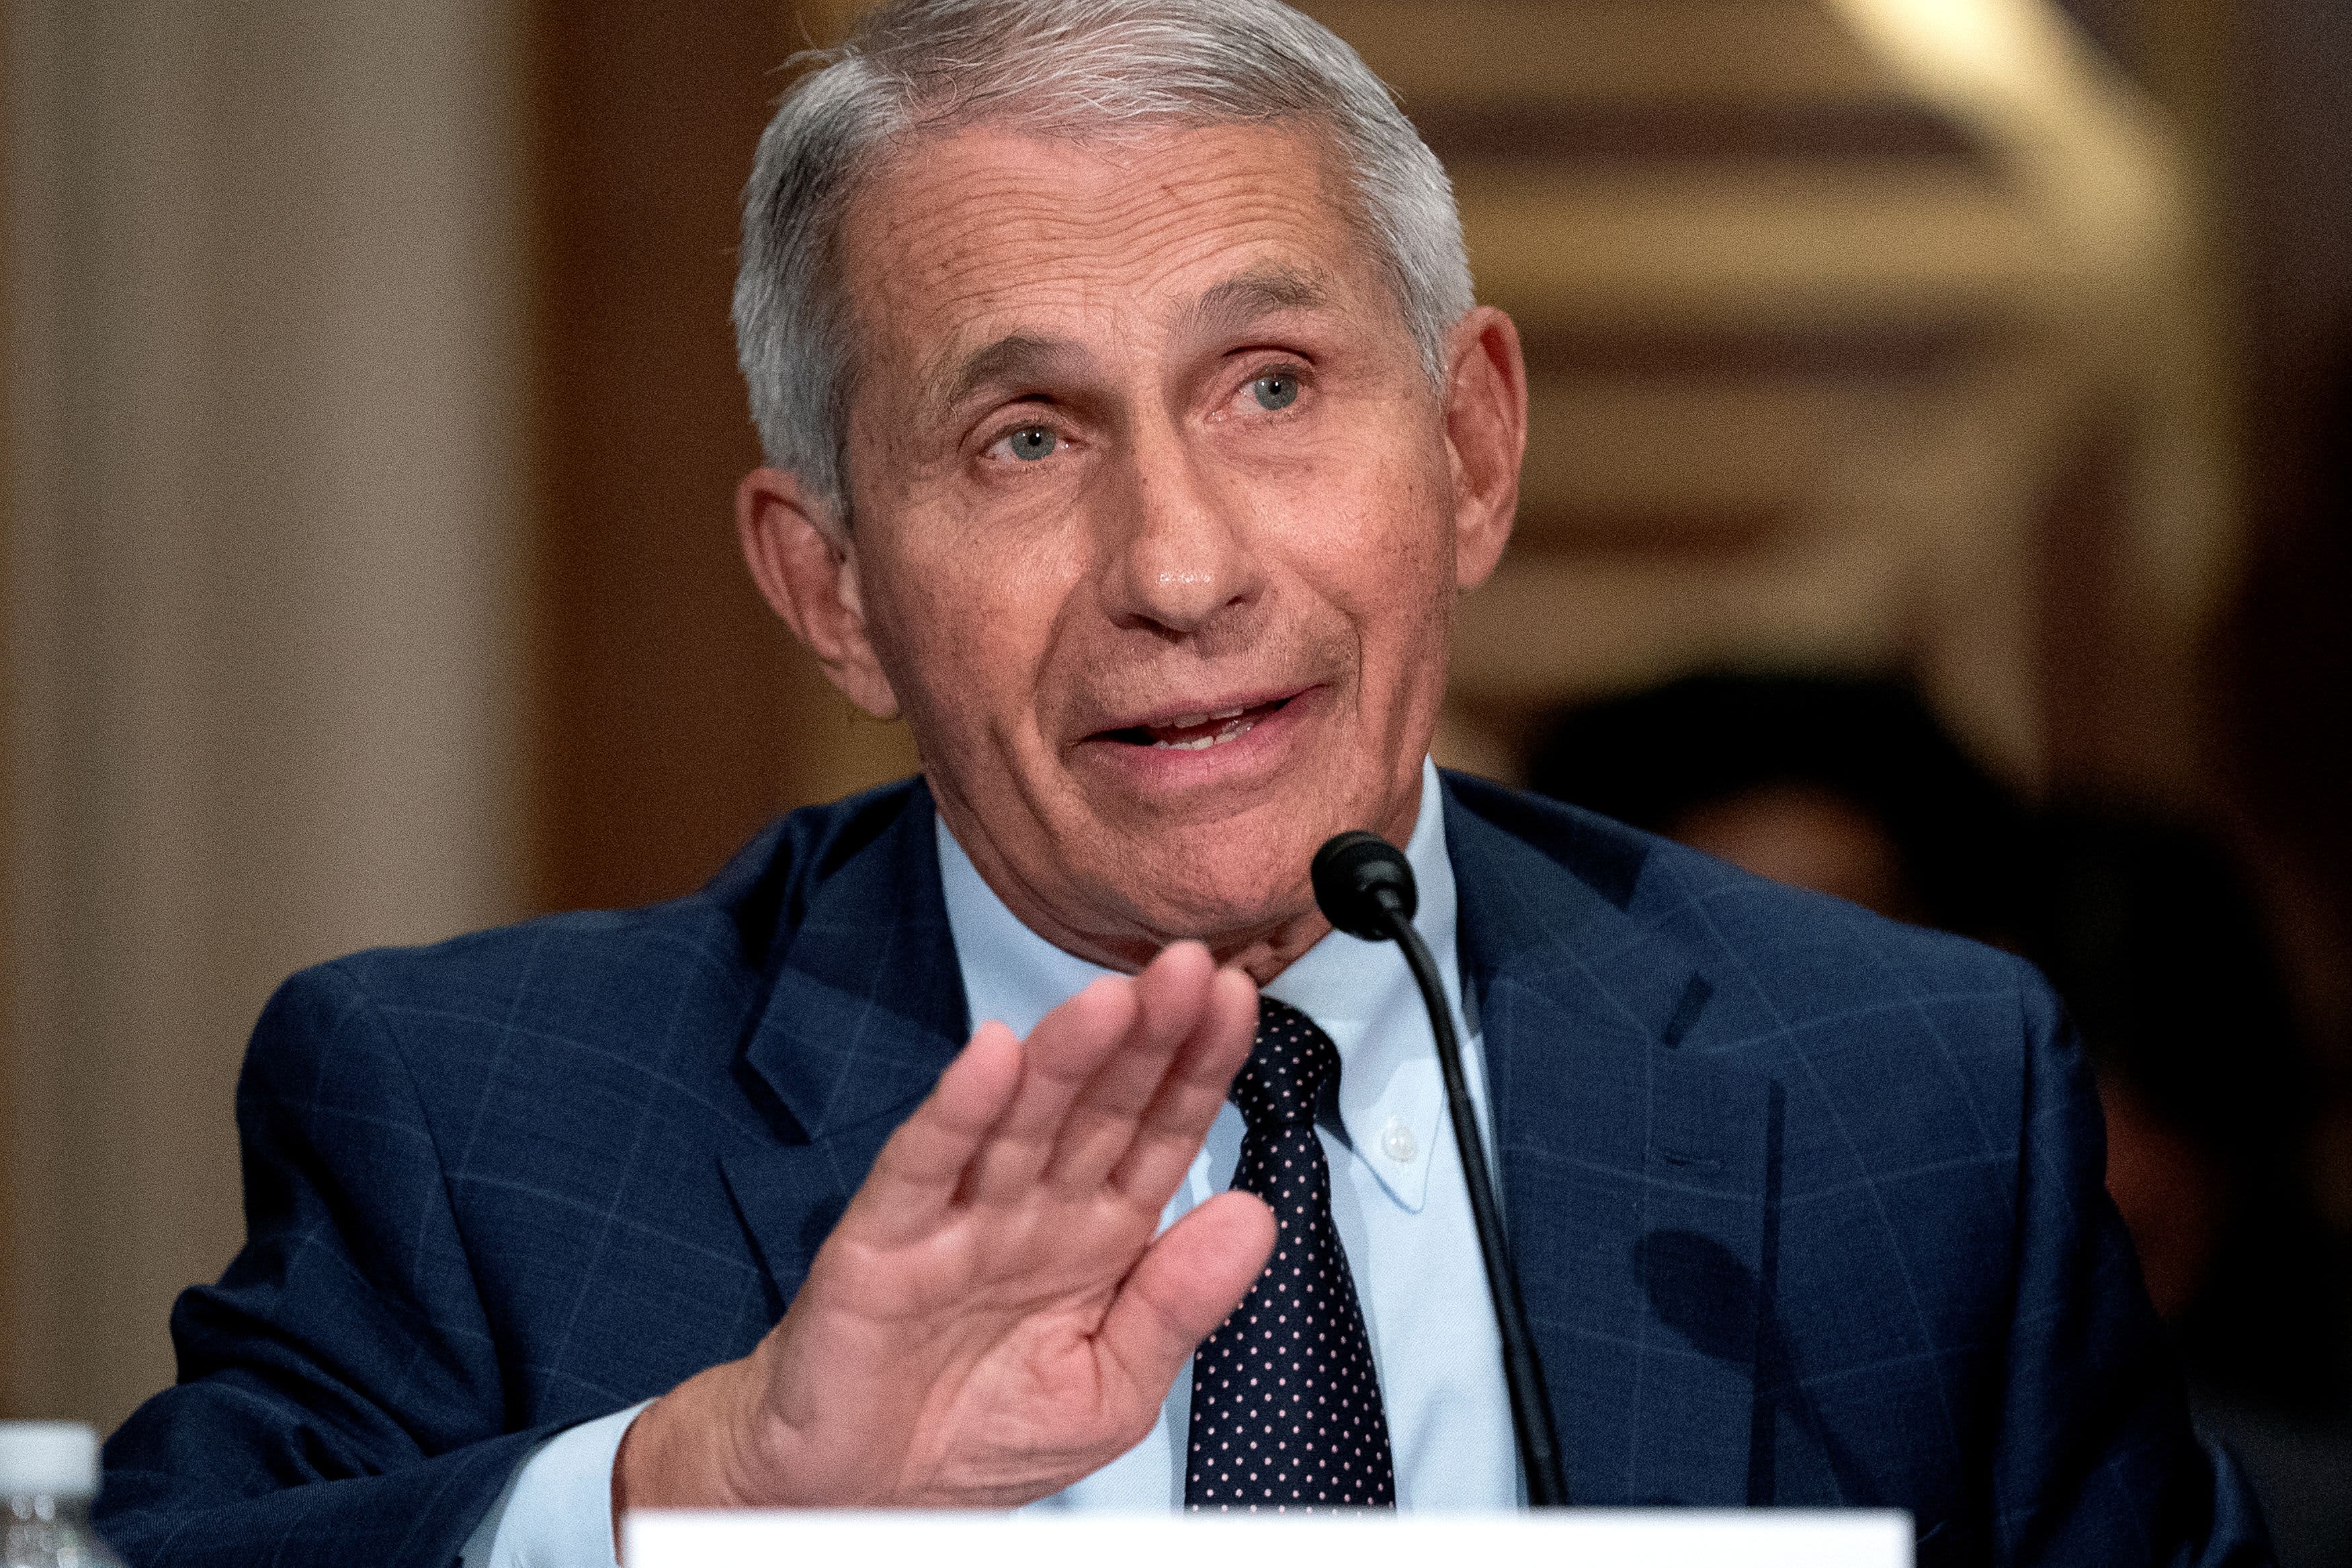 Fauci says everybody will likely need a Covid vaccine booster shot eventually